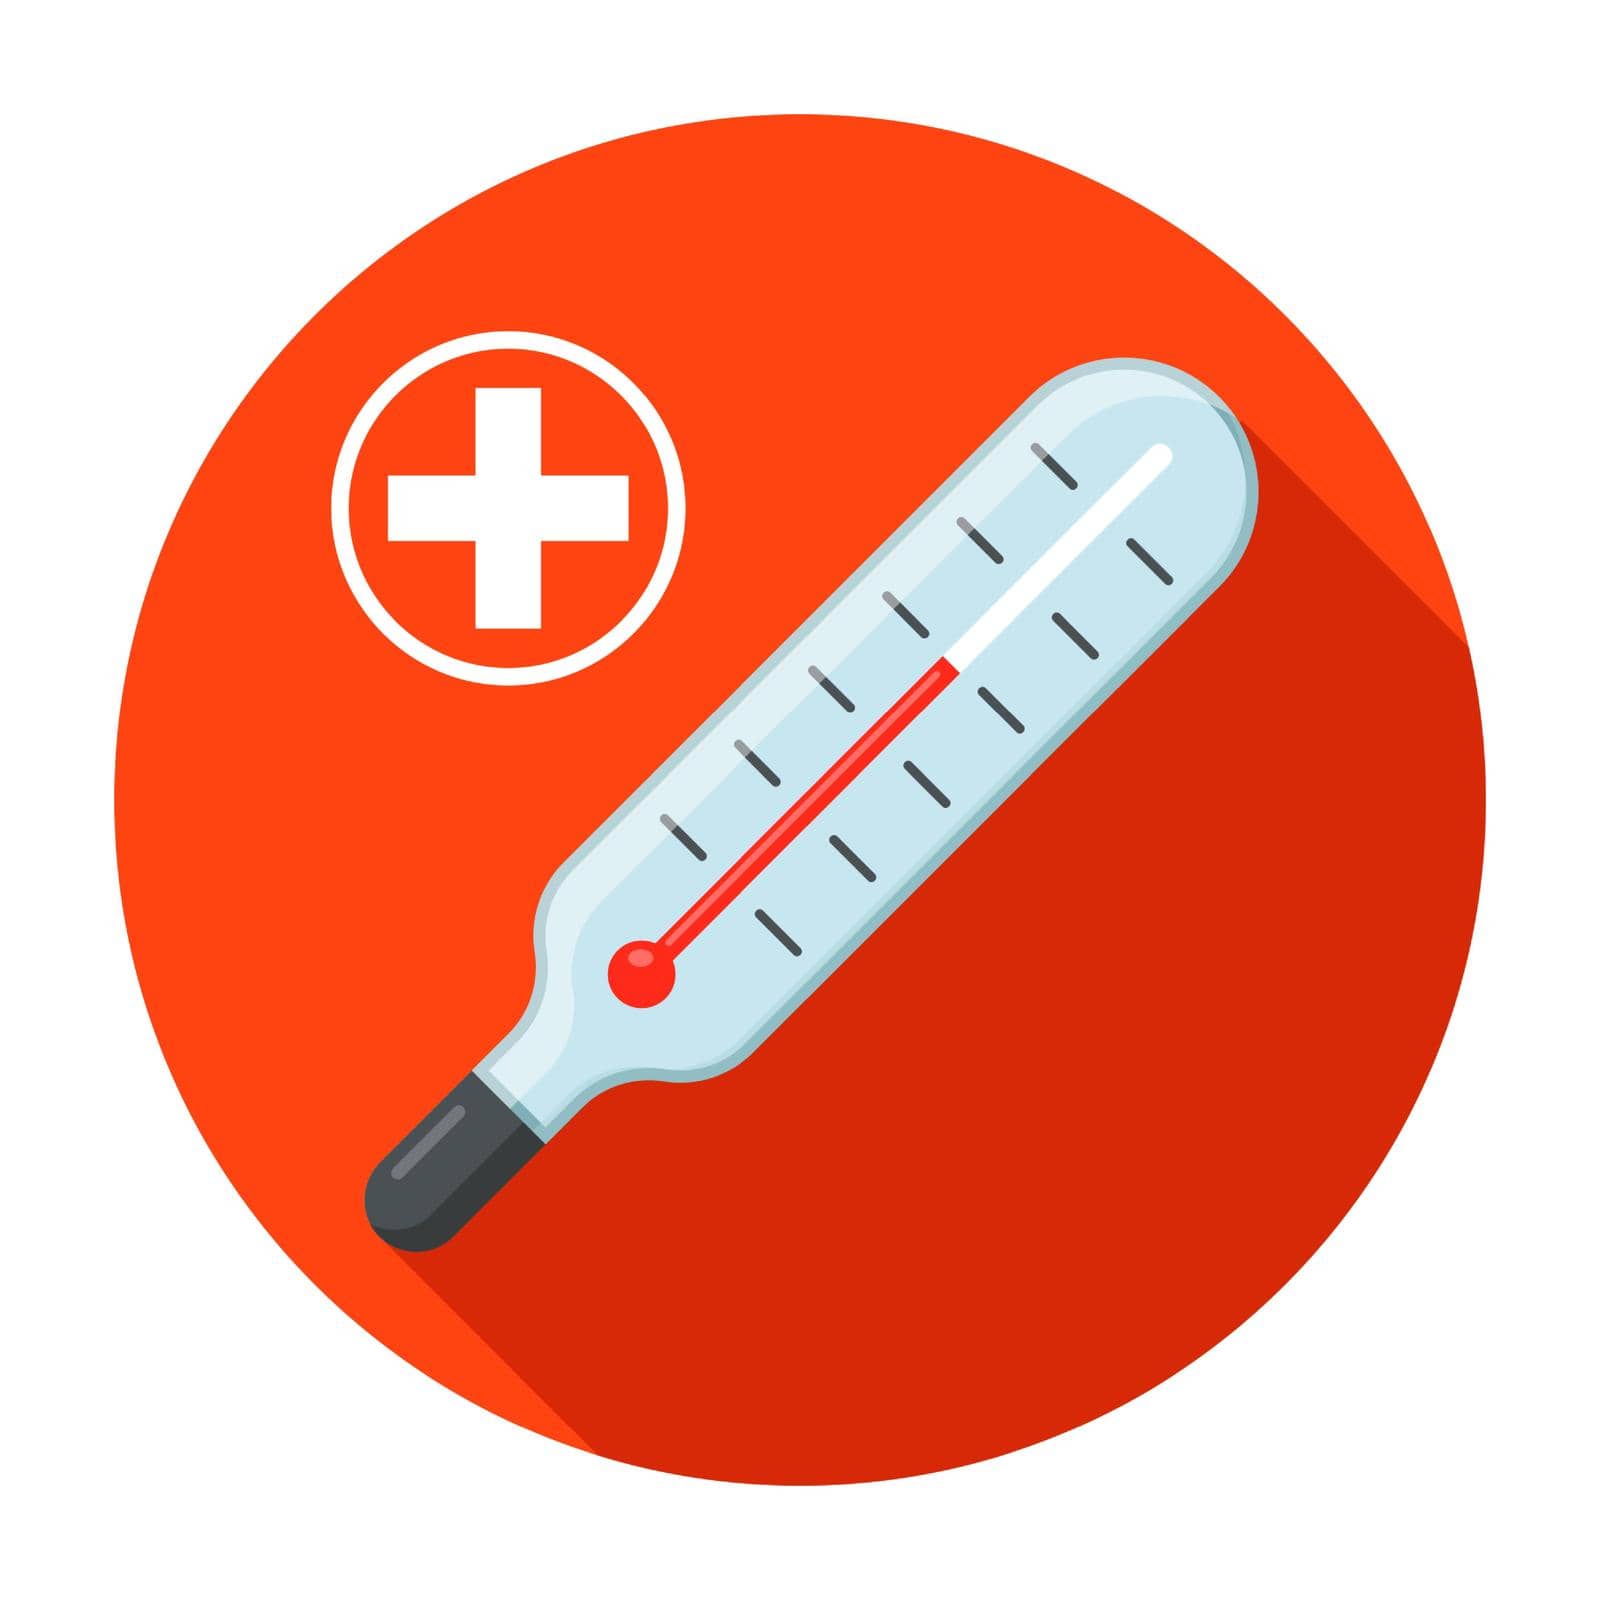 thermometer for measuring temperature to a person. icon on the red circle. flat vector illustration